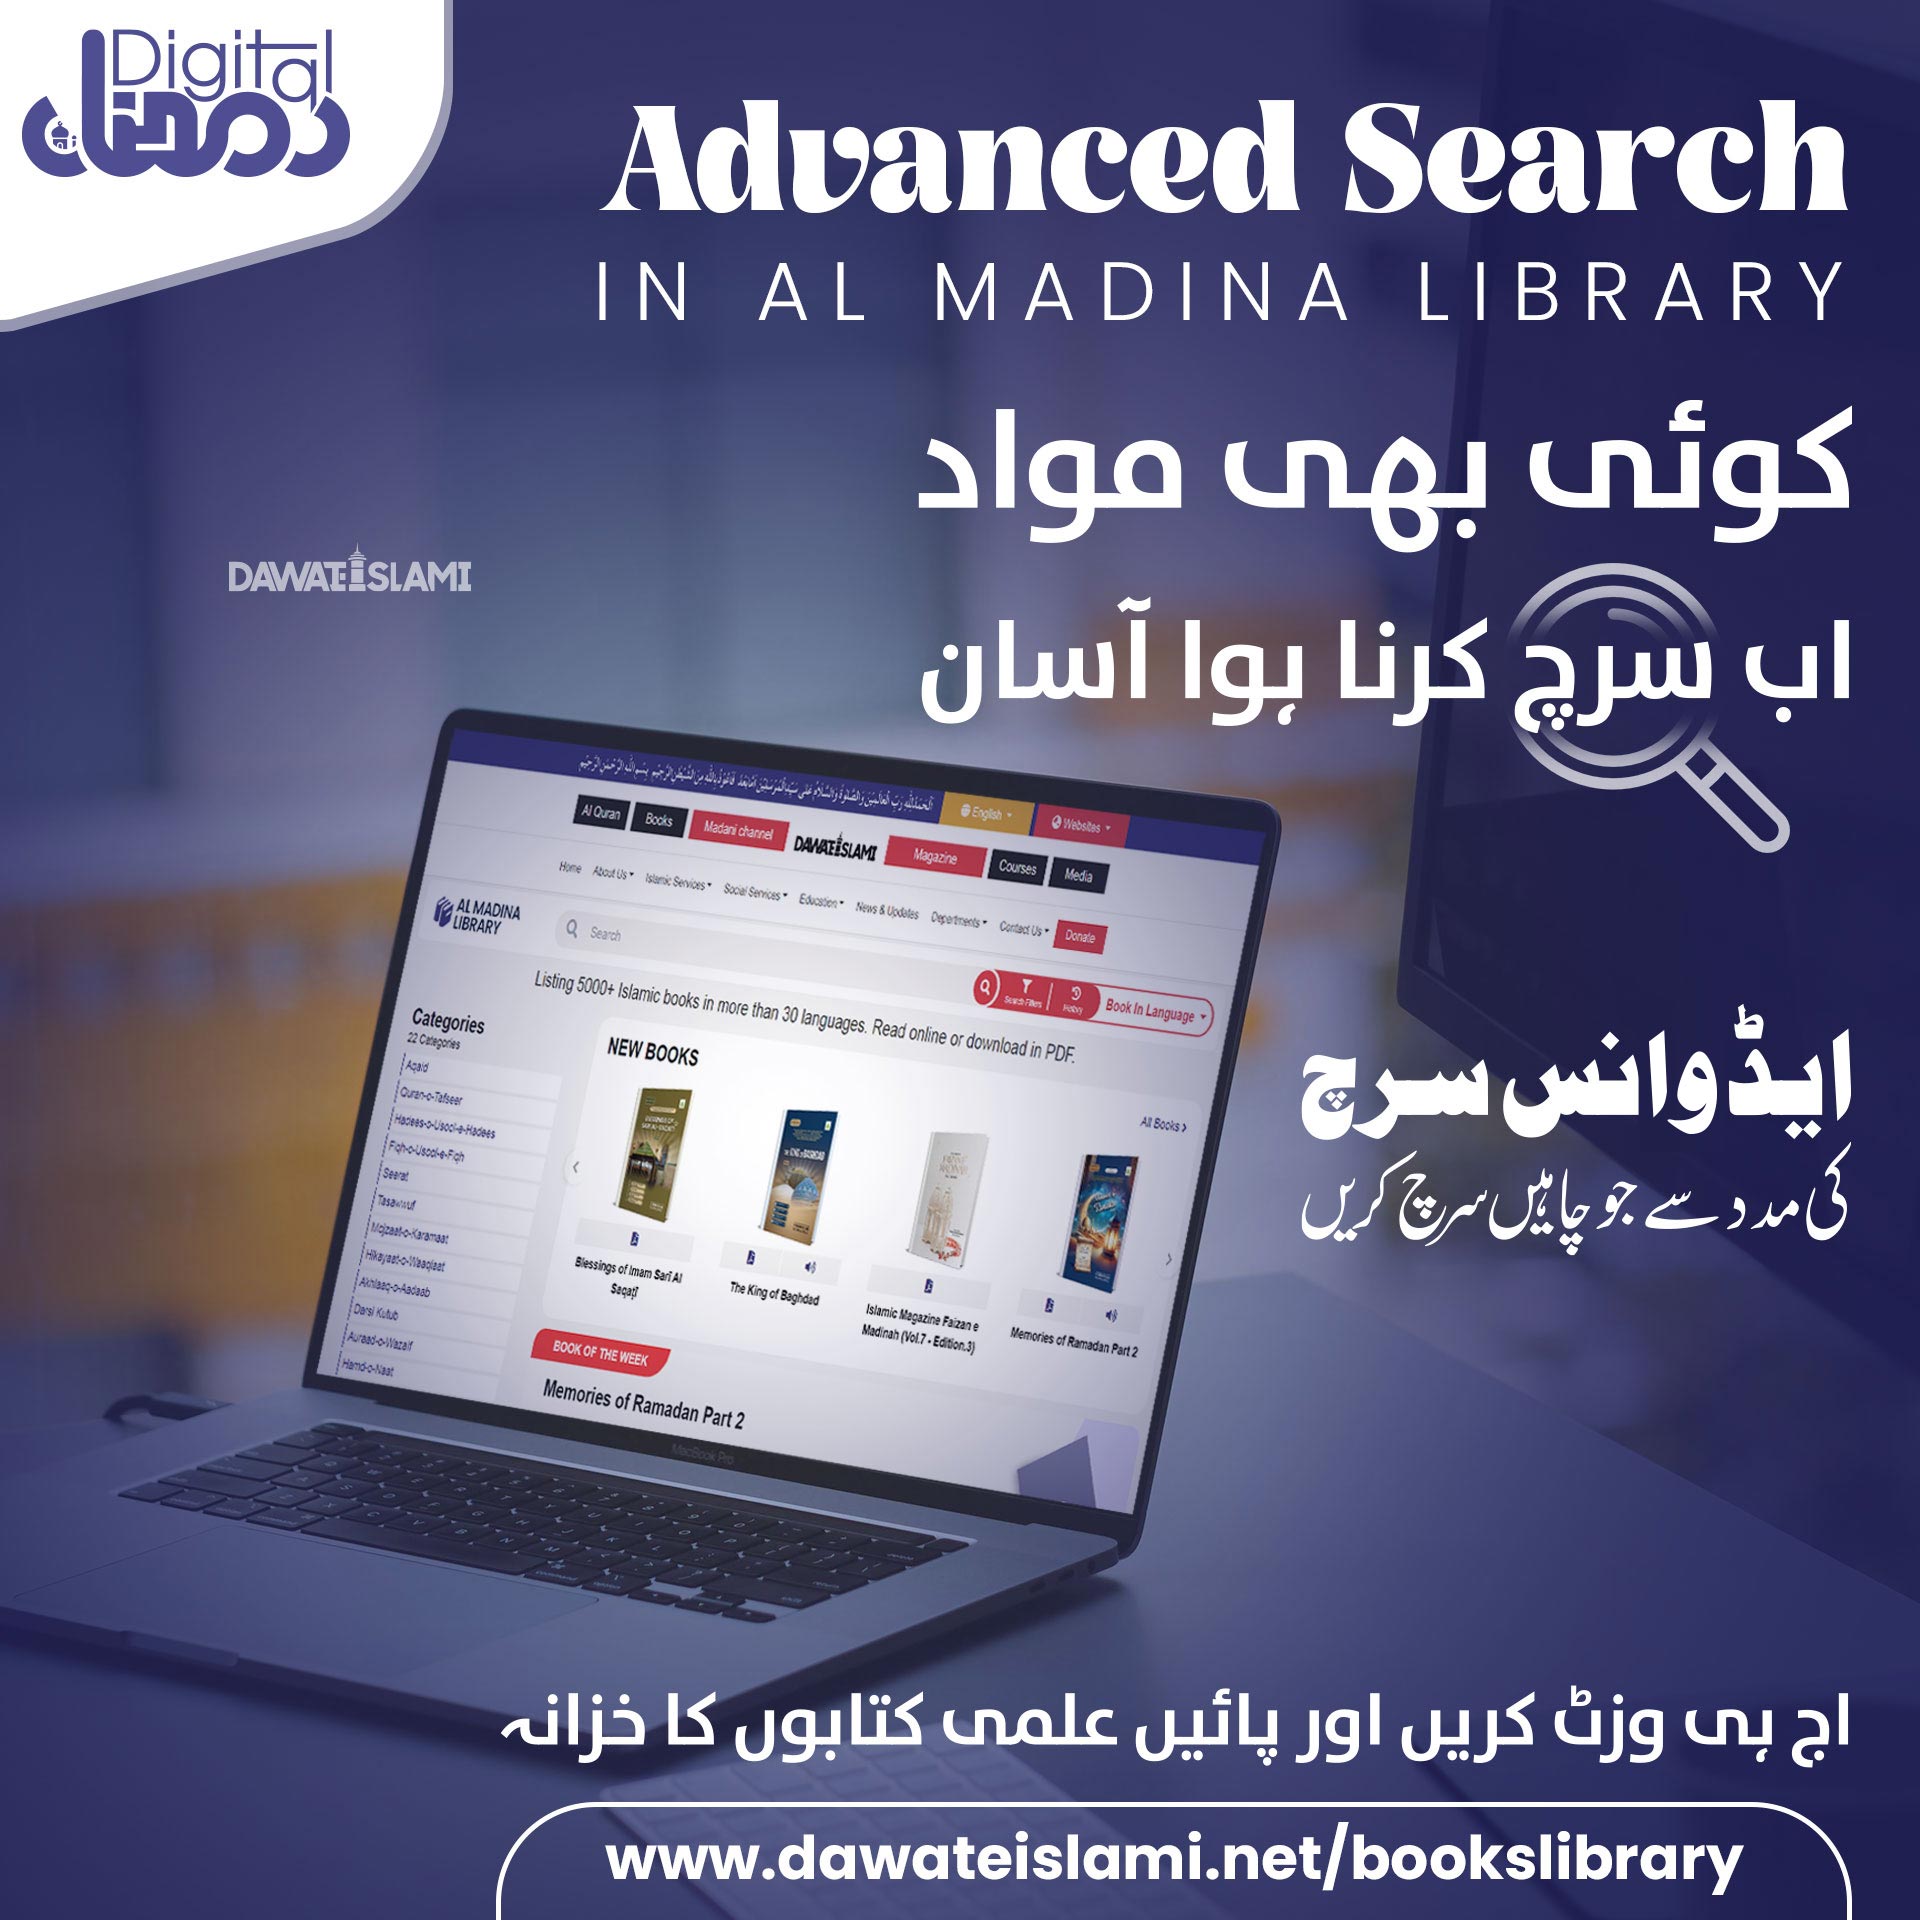 Advance Search in Almadina Library